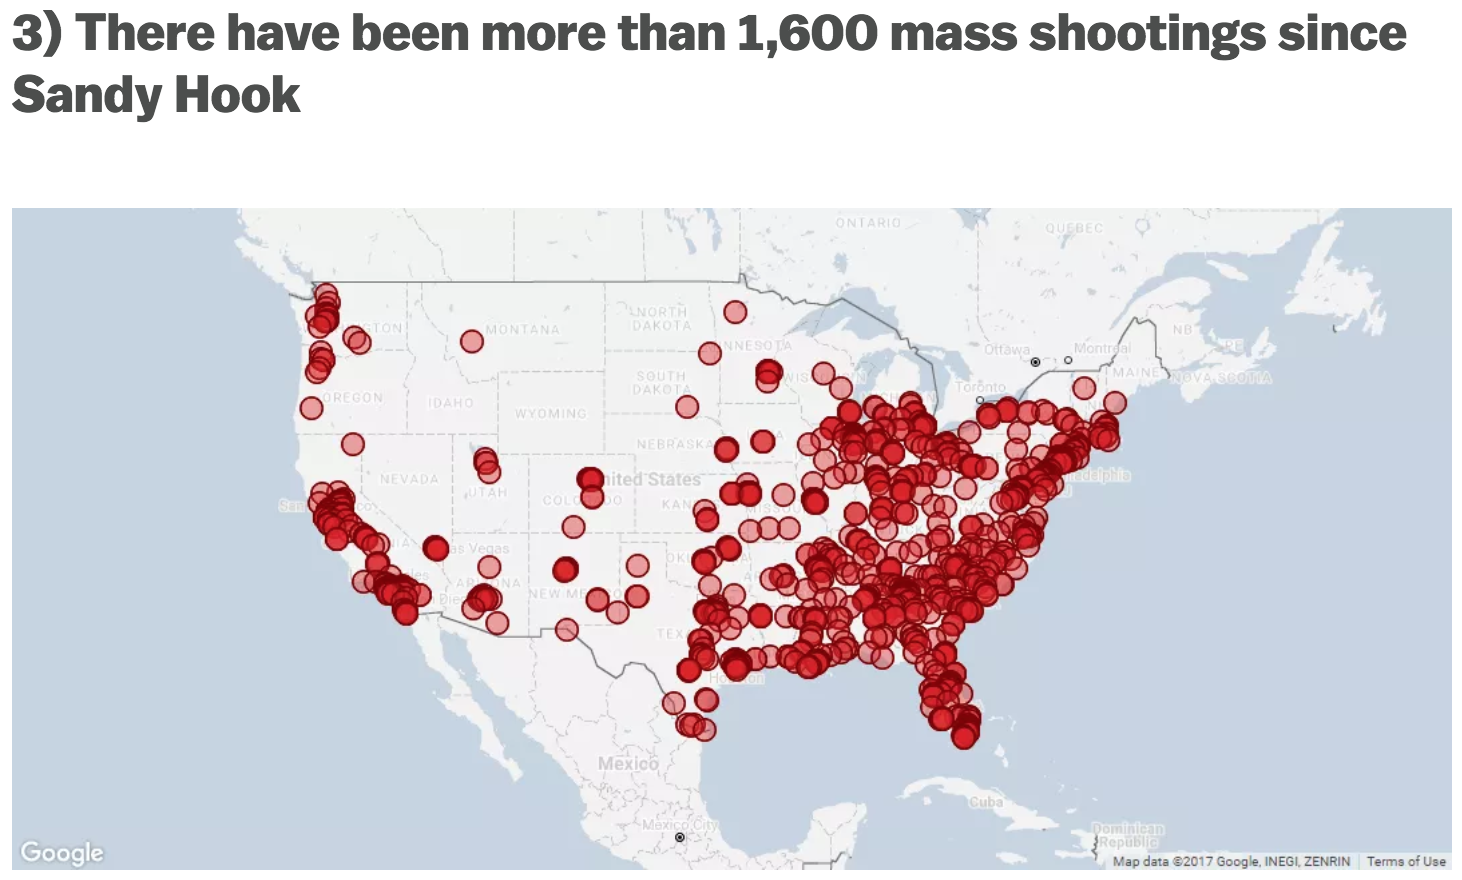 There have been more than 1,600 mass shootings since Sandy Hook